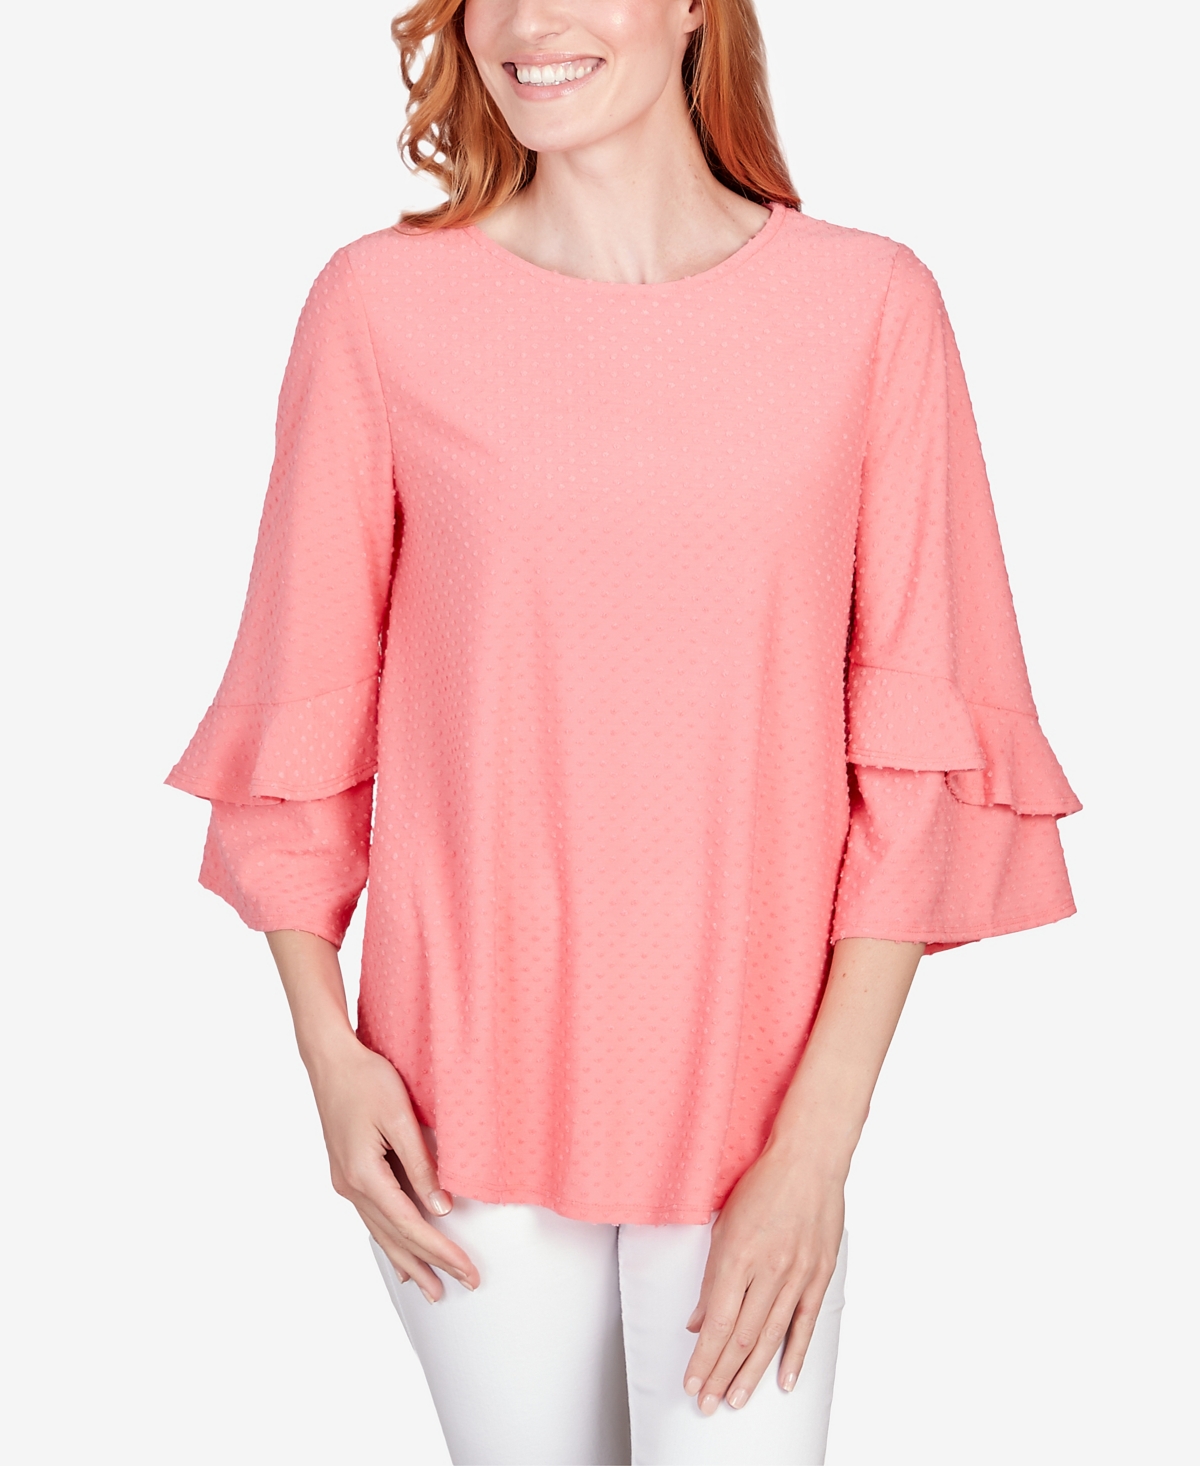 Petite Swiss Dot Textured Solid Party Top - Guava